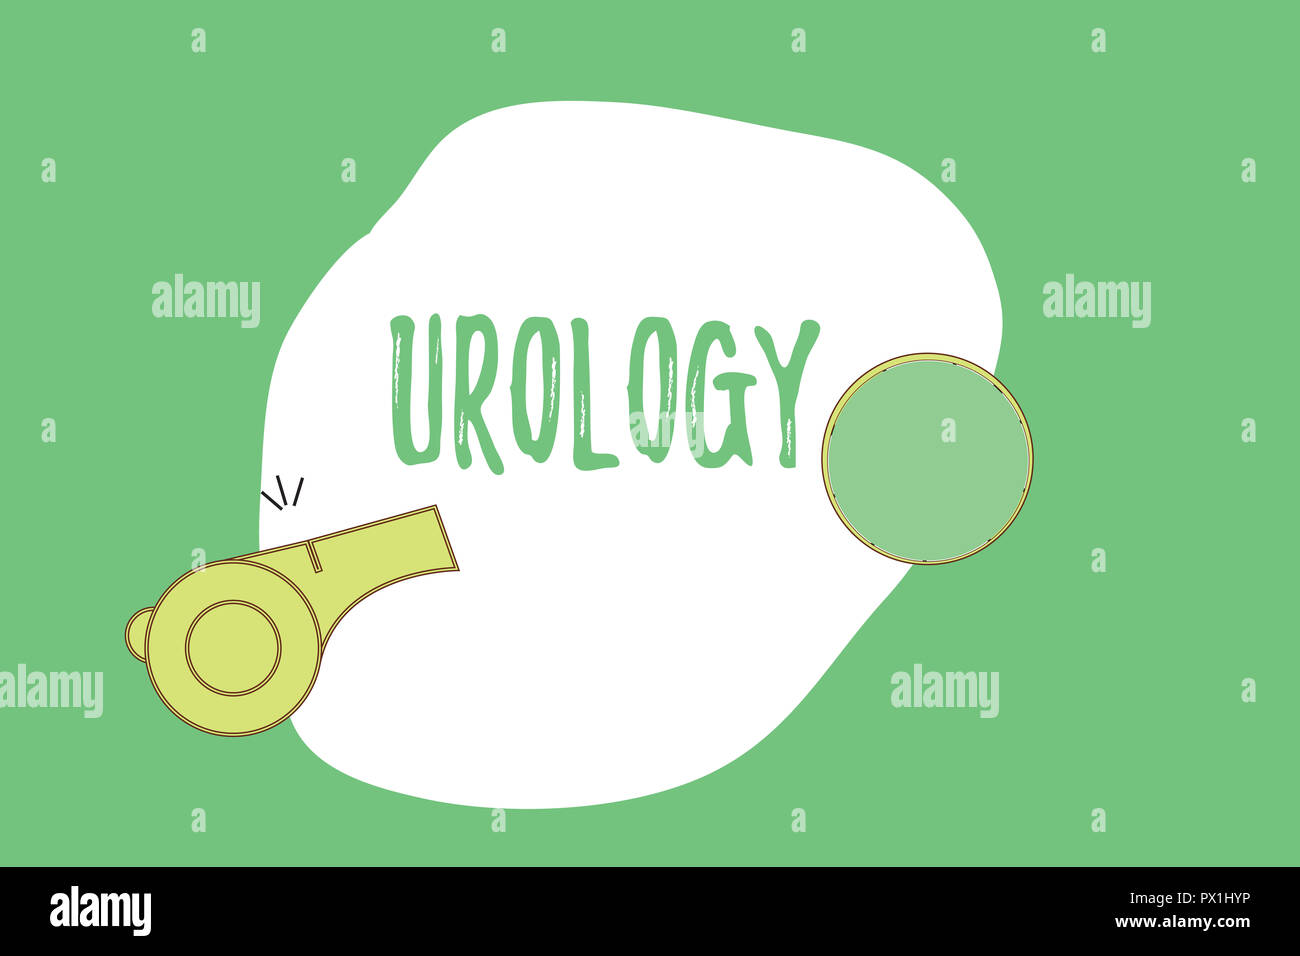 Text sign showing Urology. Conceptual photo Medicine branch related with urinary system function and disorders. Stock Photo